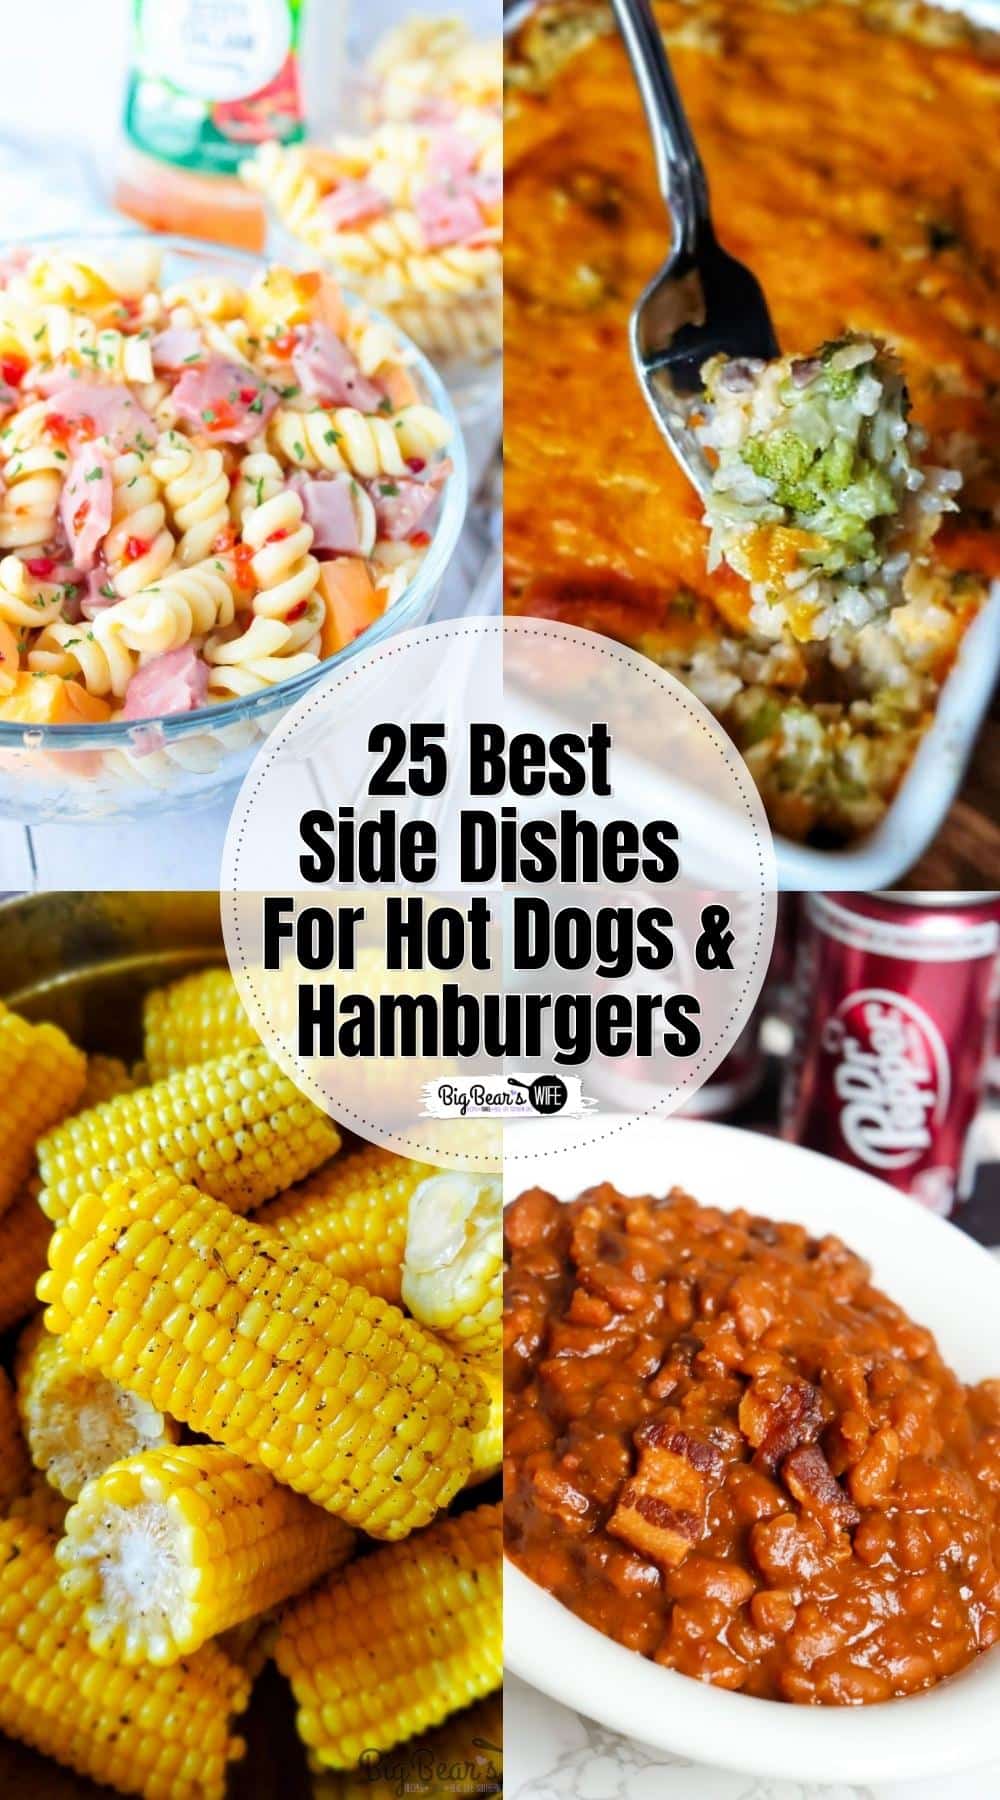 If you're making hot dogs and burgers for dinner, you'll want to have some side dishes to go with them! Here we've got 25 of the best side dishes to serve up with hot dogs, corn dogs, burgers, and cheeseburgers!  via @bigbearswife